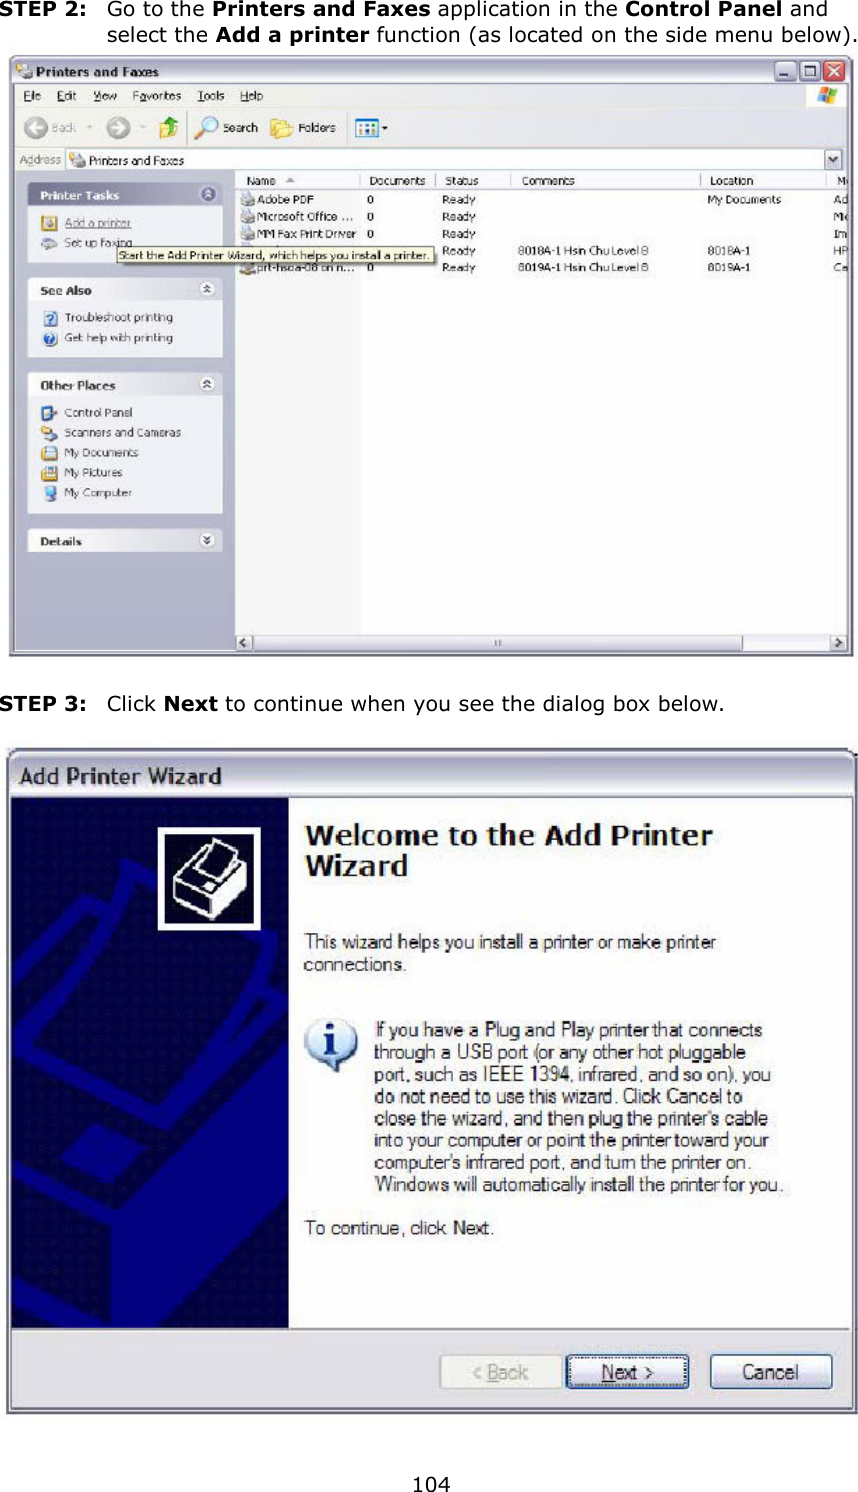   104 STEP 2:   Go to the Printers and Faxes application in the Control Panel and select the Add a printer function (as located on the side menu below).   STEP 3:  Click Next to continue when you see the dialog box below.    